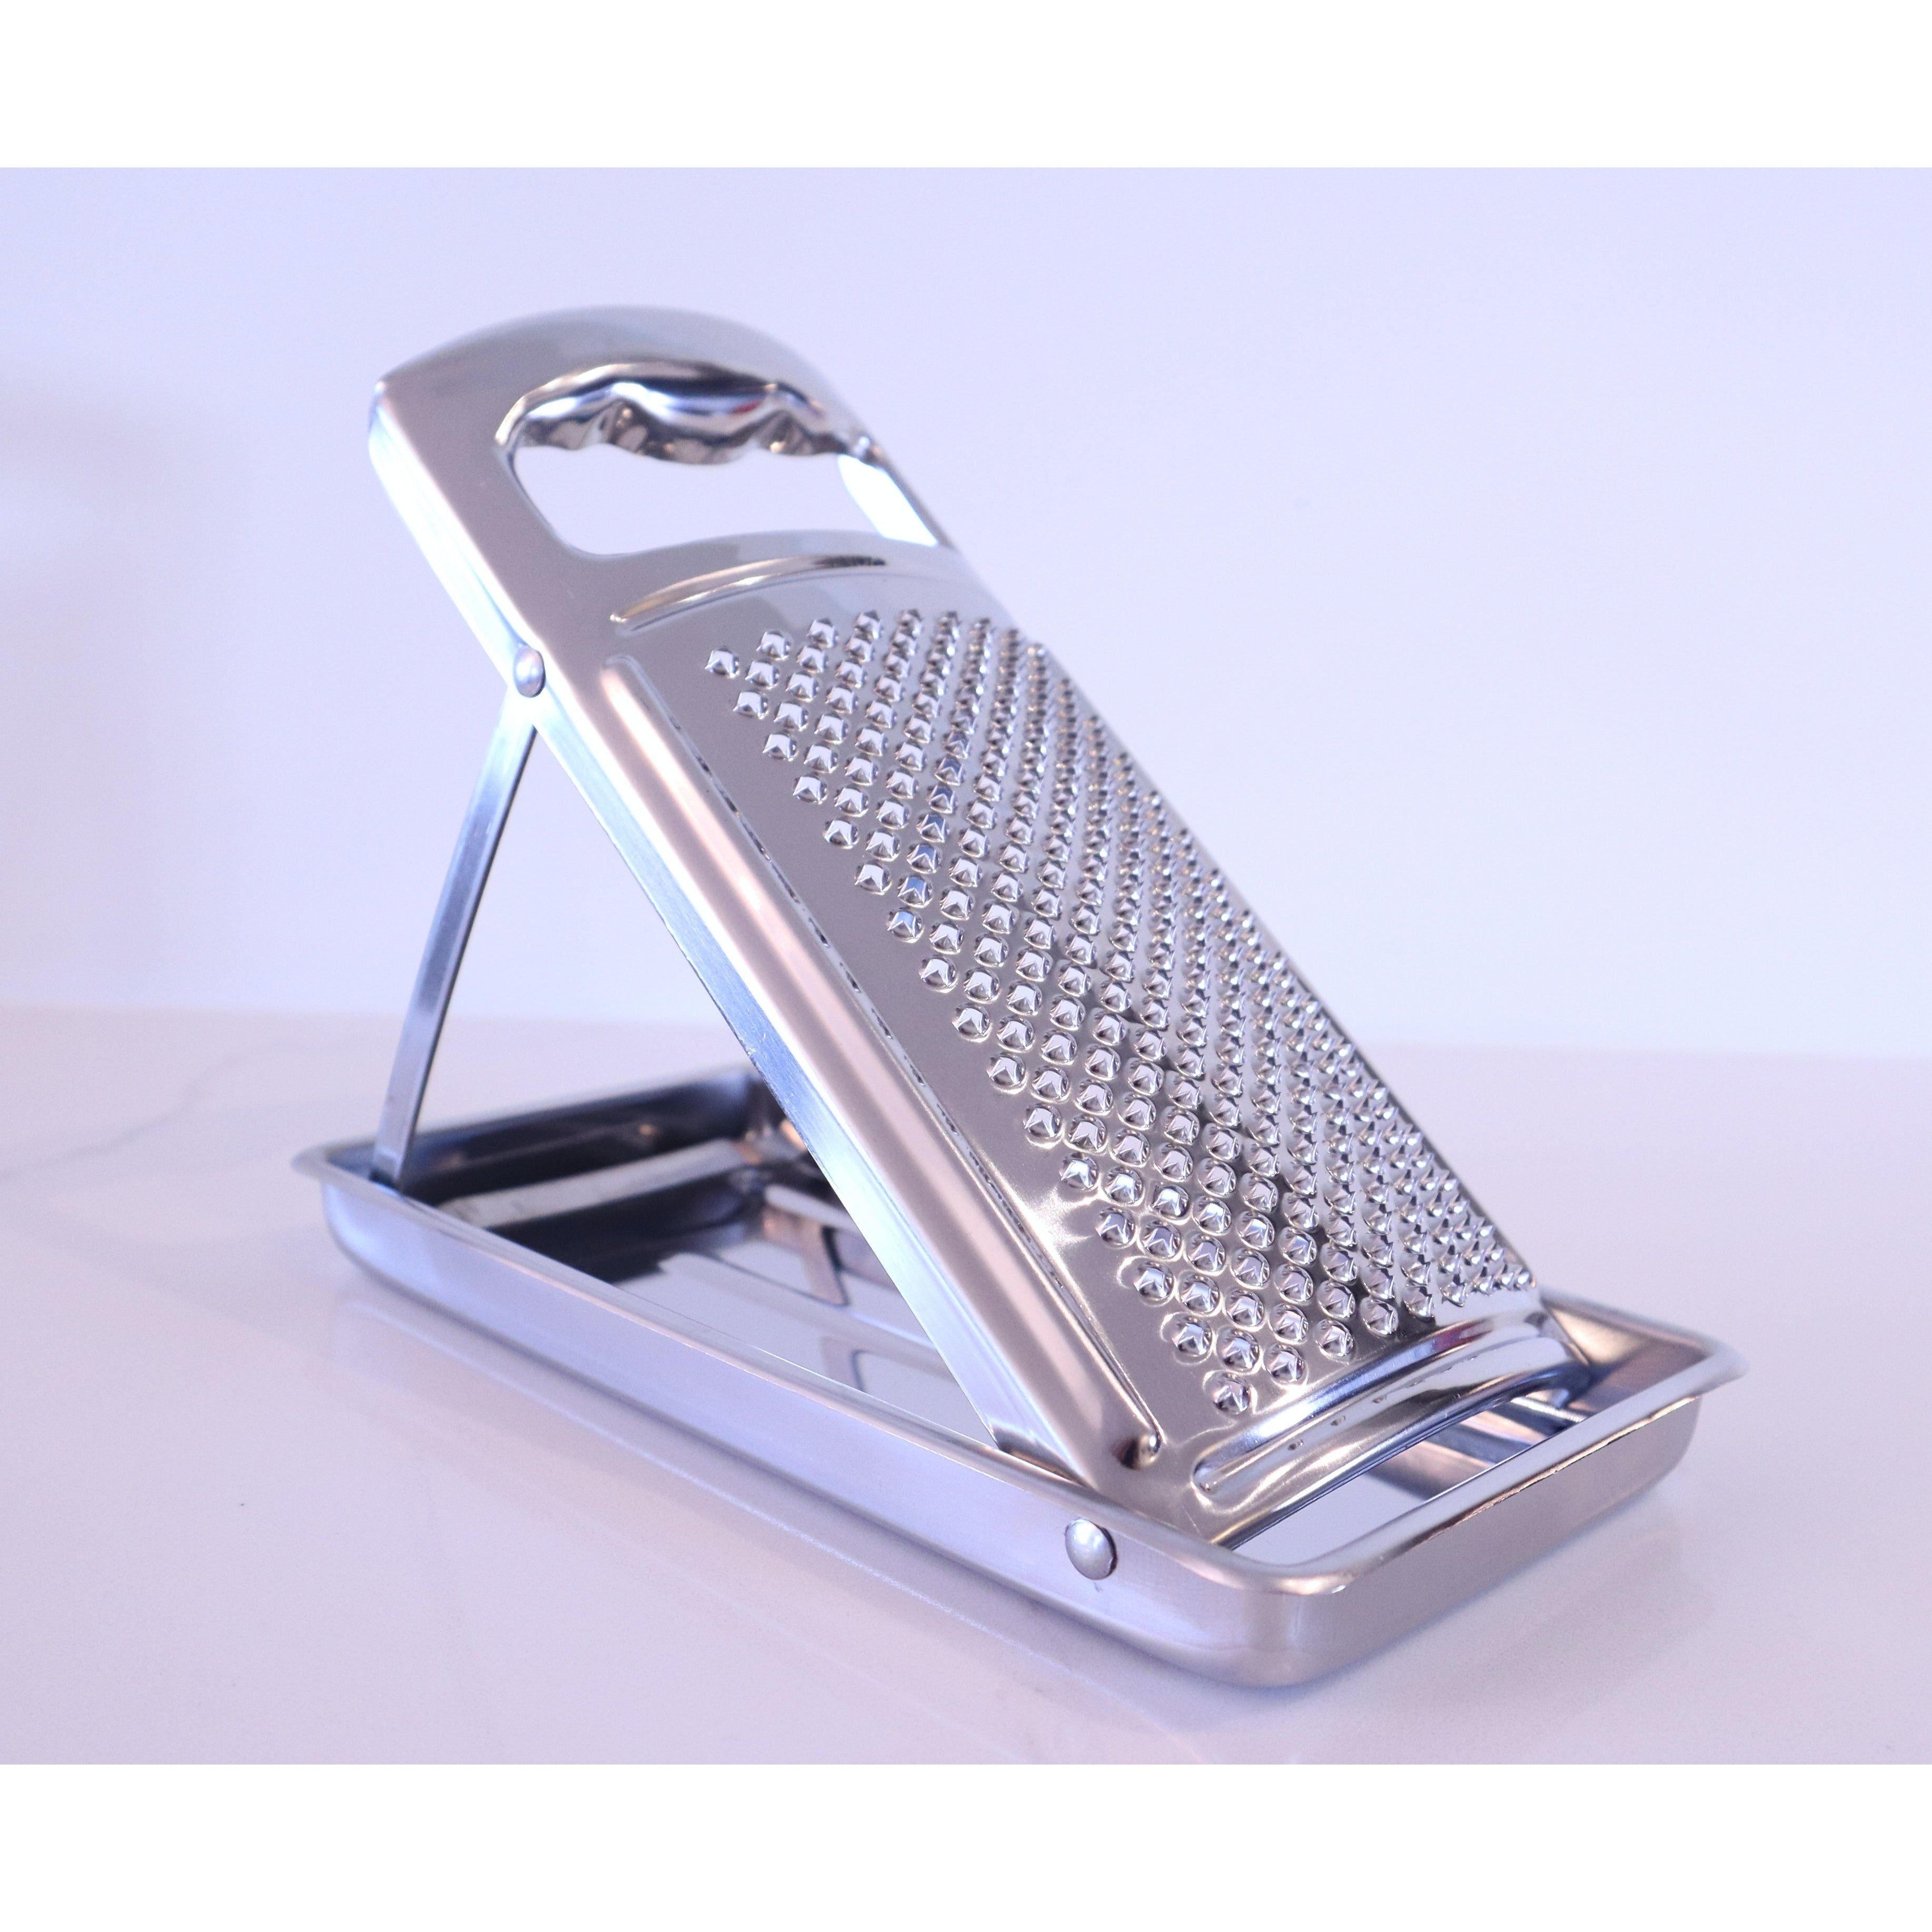 Eppicotispai Stainless Steel Cheese Grater with Case and Handle Manual